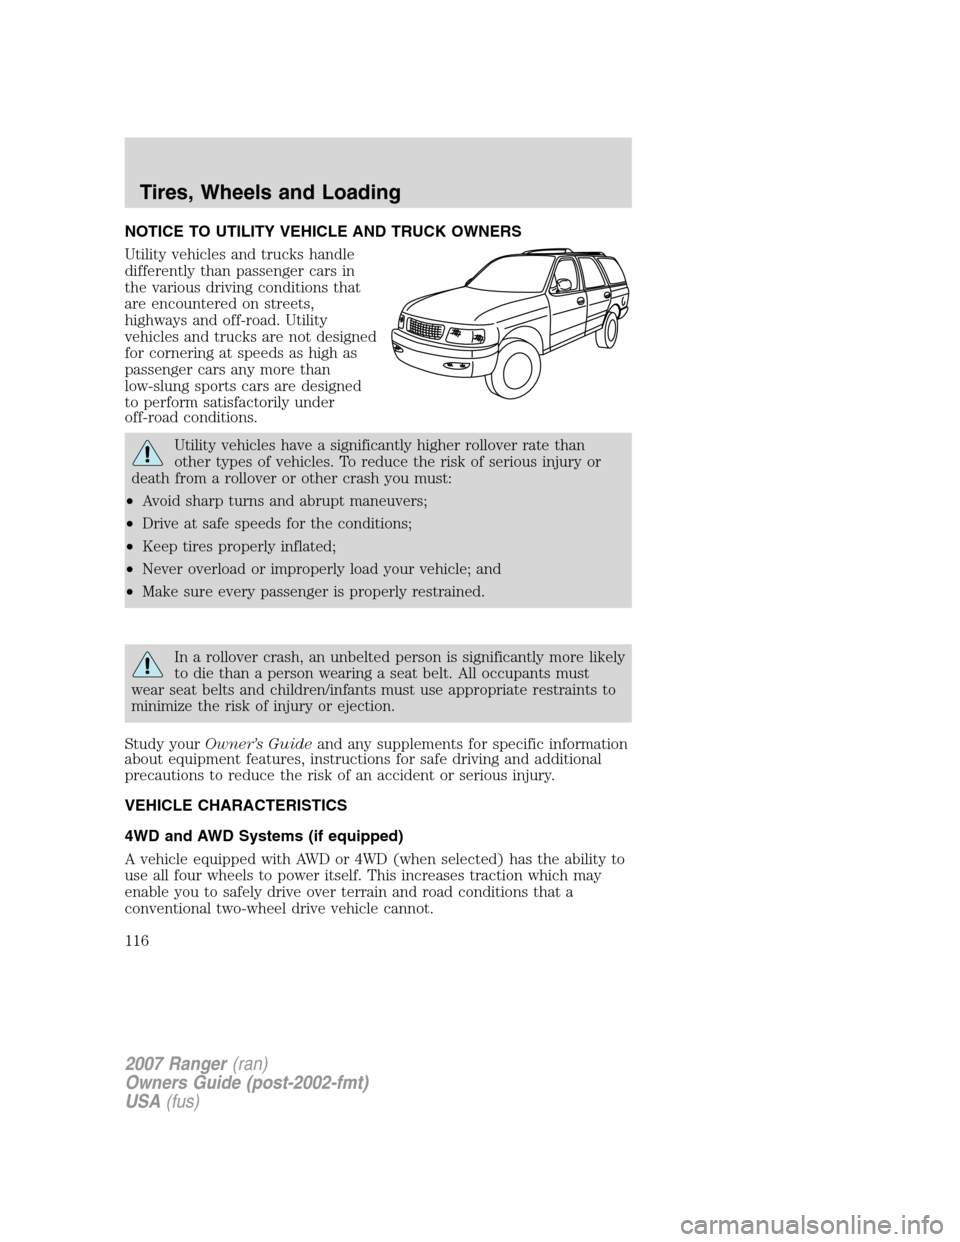 FORD RANGER 2007 2.G Owners Manual NOTICE TO UTILITY VEHICLE AND TRUCK OWNERS
Utility vehicles and trucks handle
differently than passenger cars in
the various driving conditions that
are encountered on streets,
highways and off-road. 